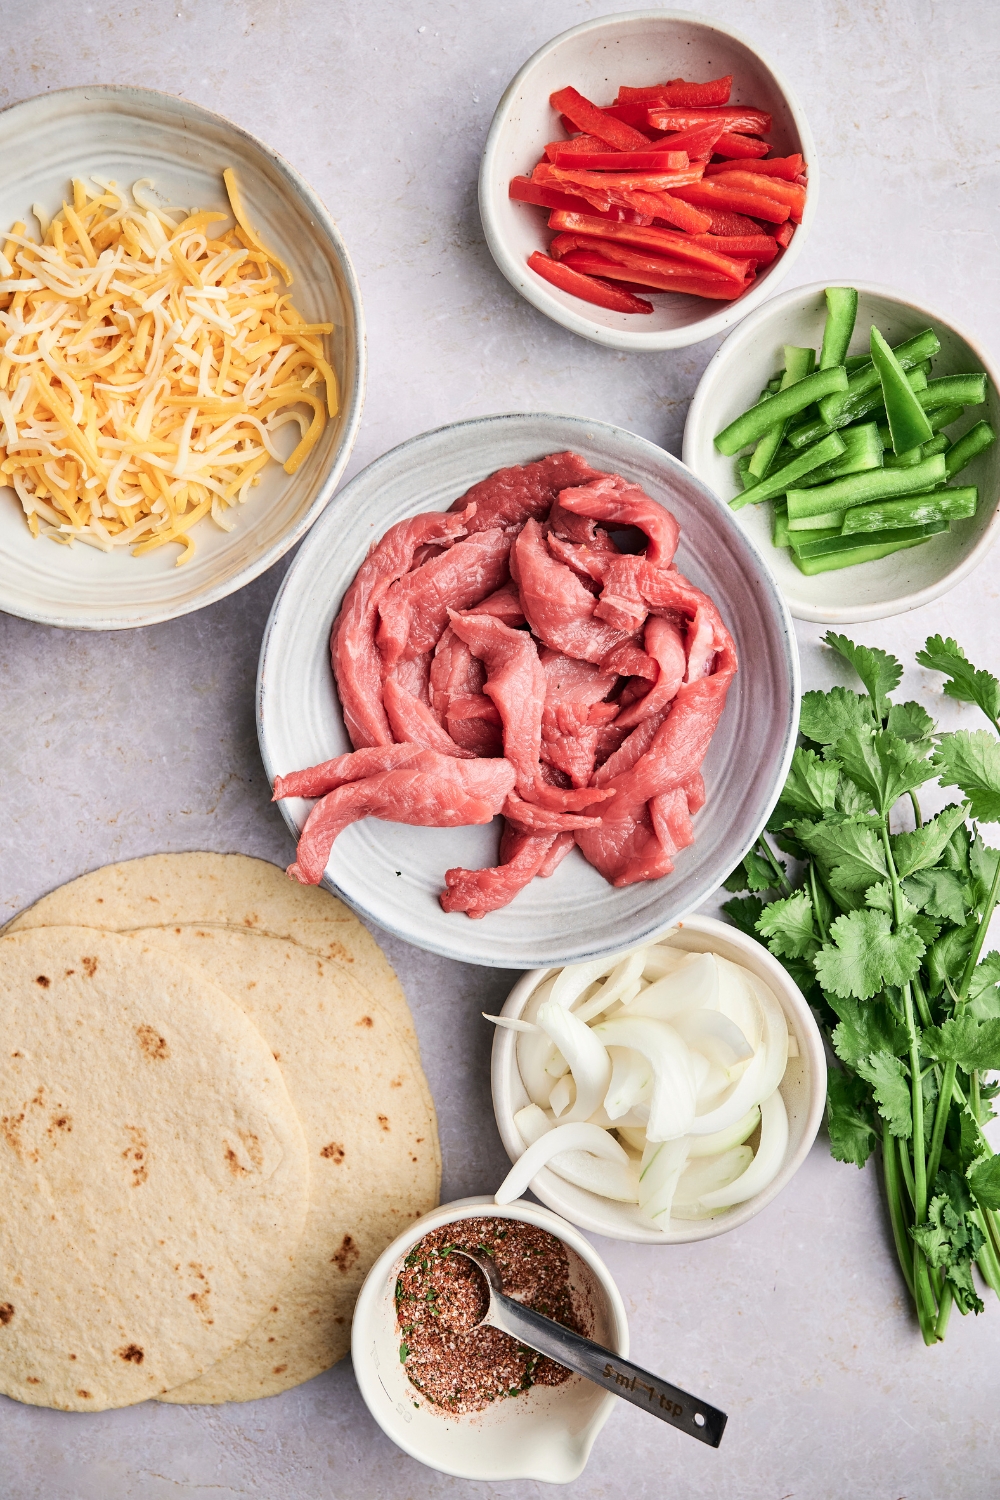 Steak strips, bell peppers, shredded cheese, tortillas, onions, taco seasoning, and fresh cilantro are in separate containers on a counter top.